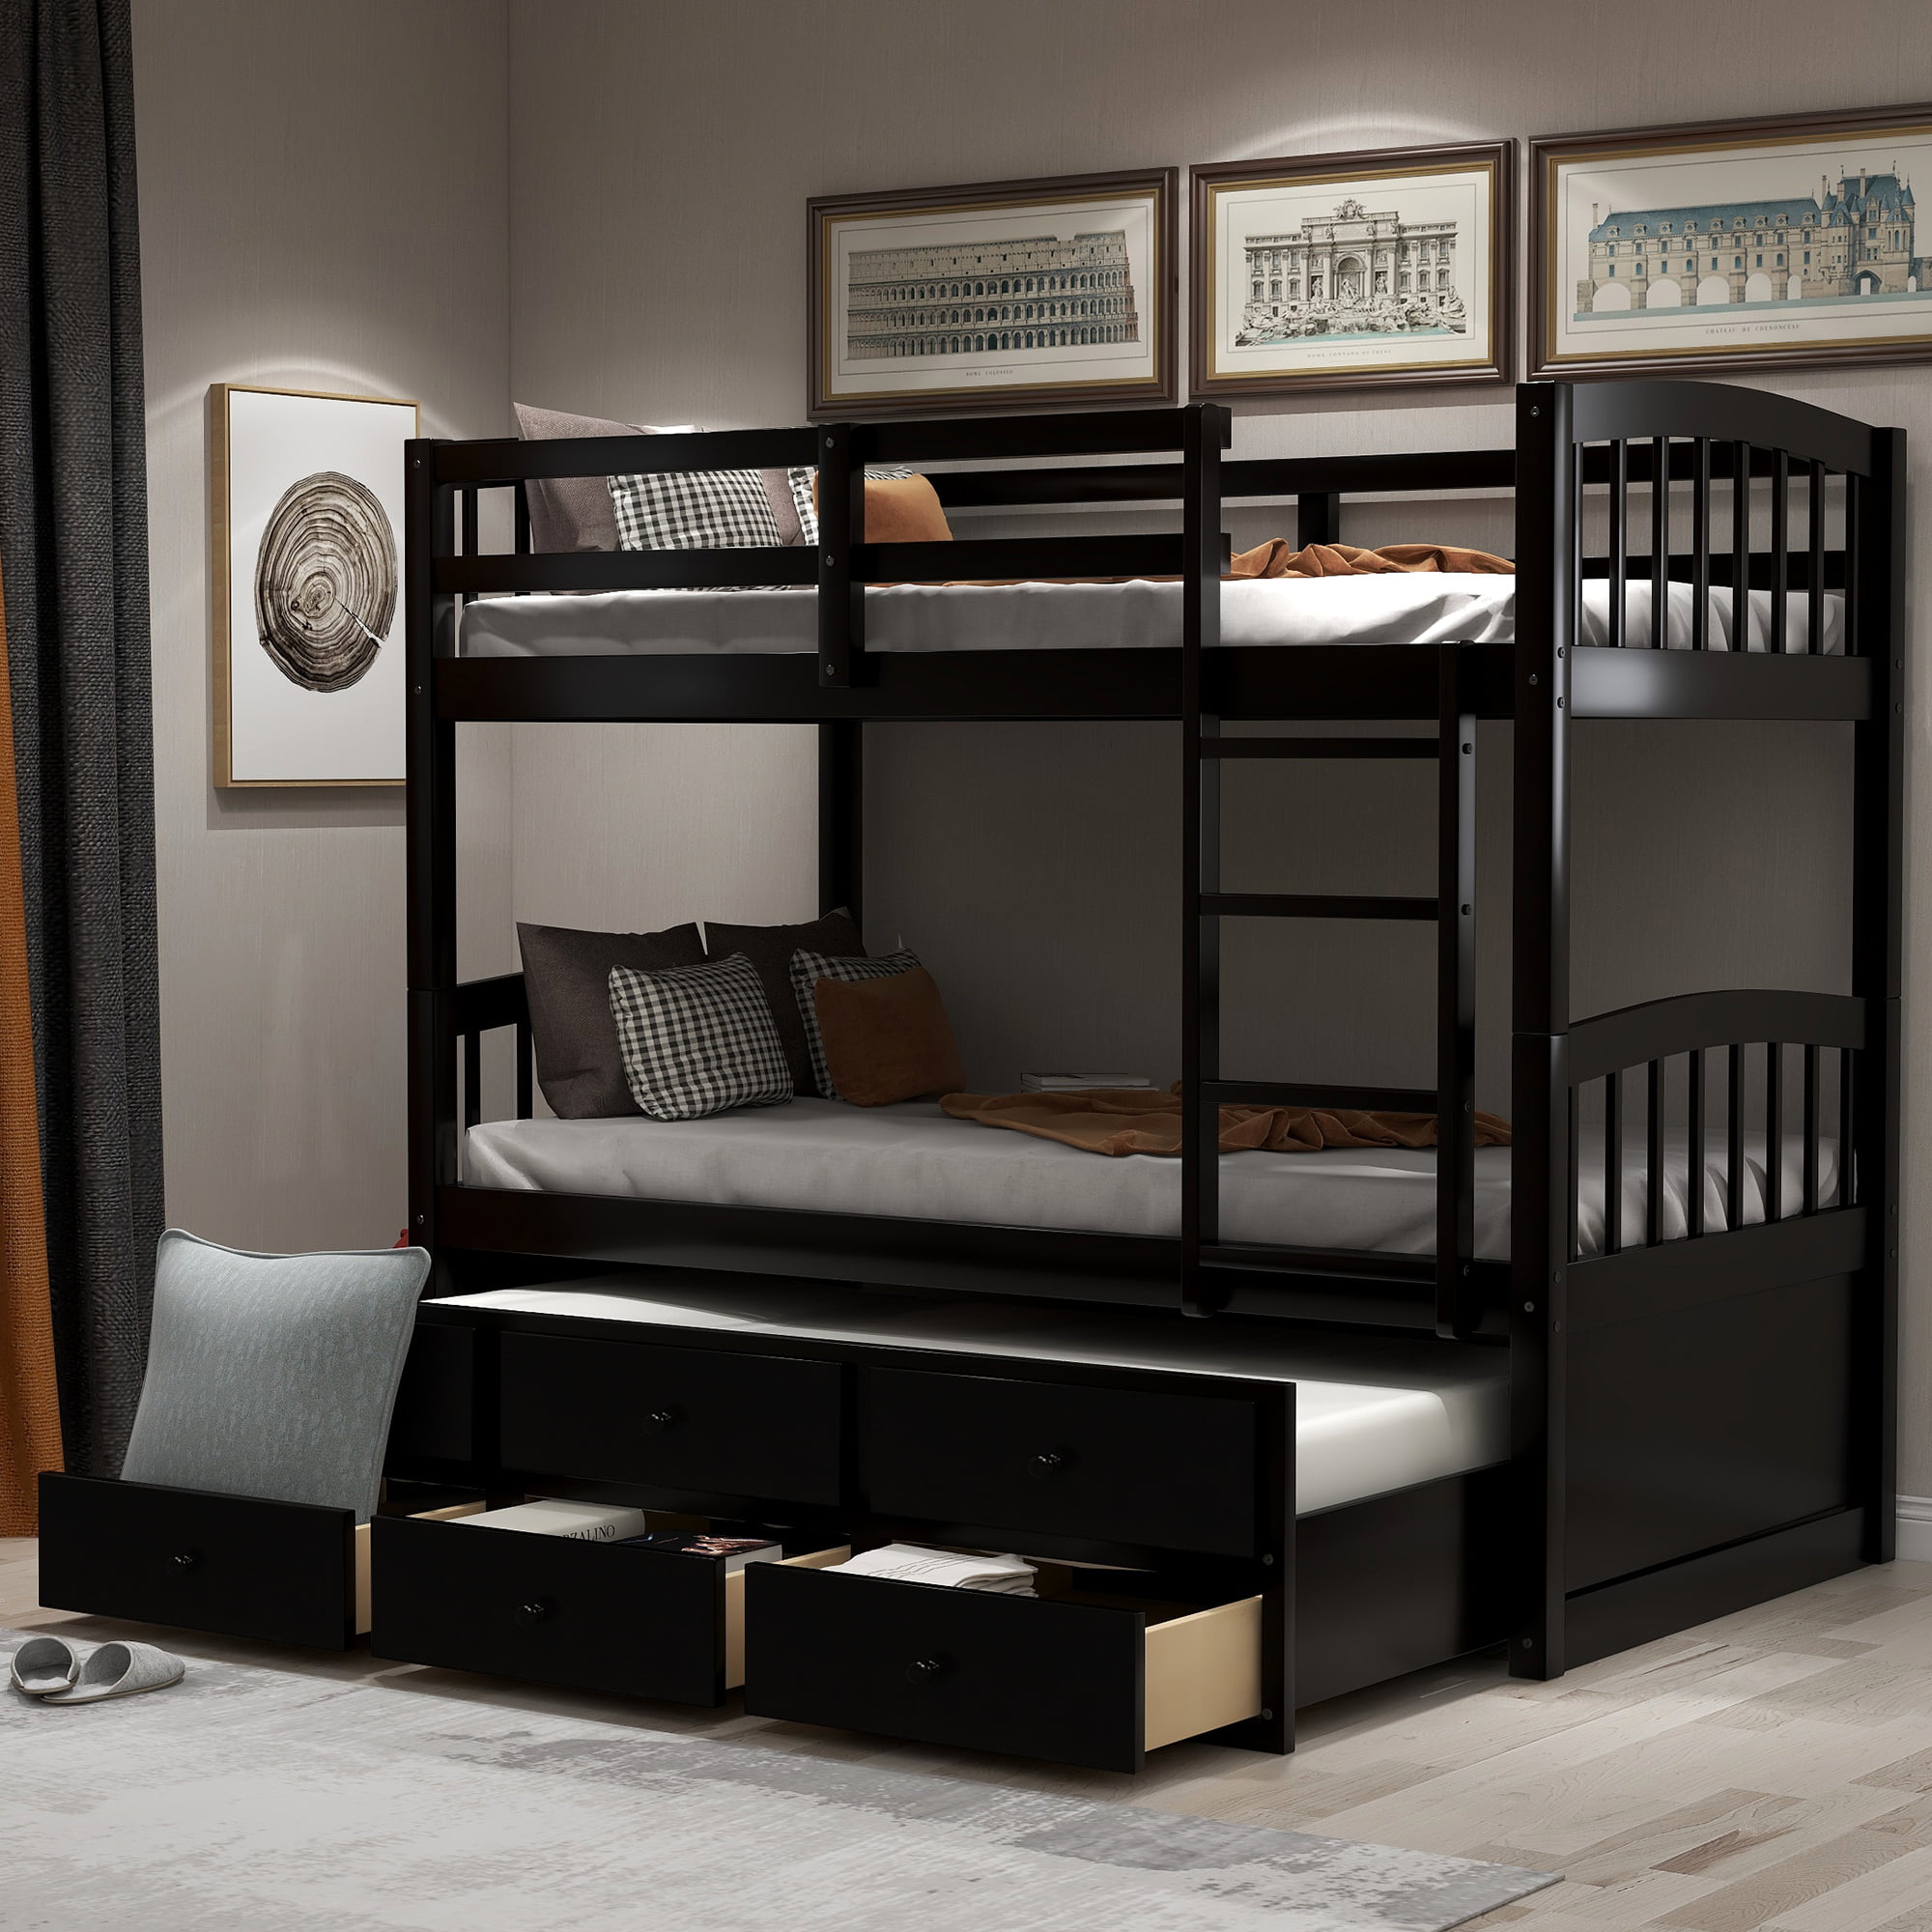 Twin Over Bunk Bed Solid Wood, Sauder Bunk Beds